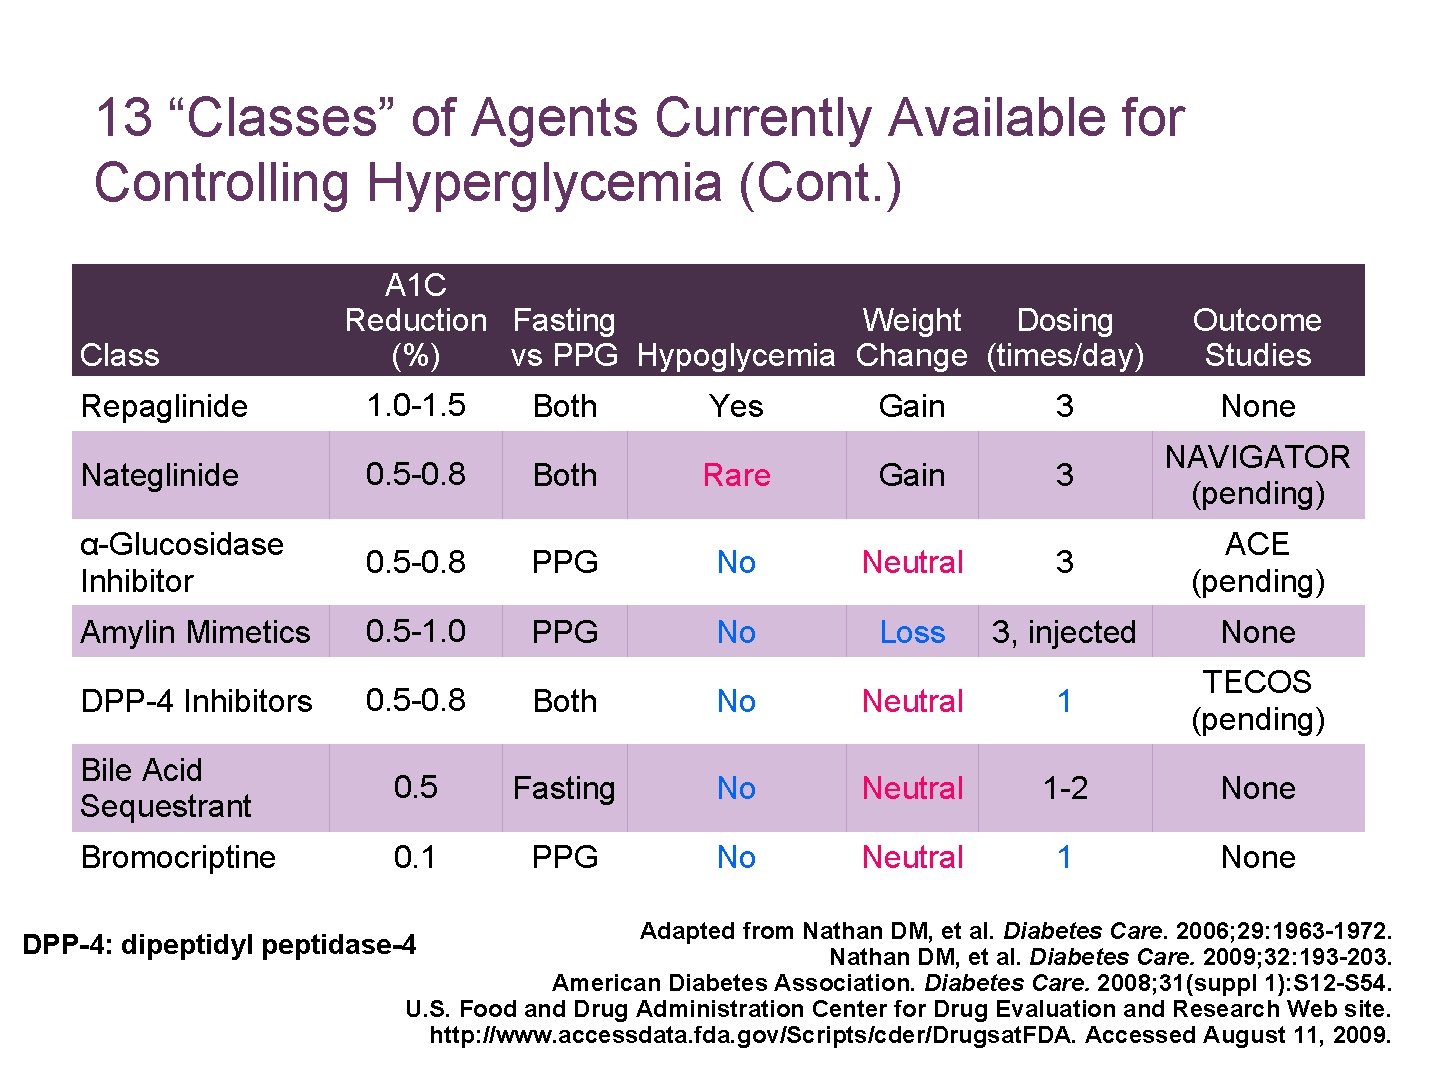 13 “Classes” of Agents Currently Available for Controlling Hyperglycemia (Cont. ) Class Repaglinide Nateglinide